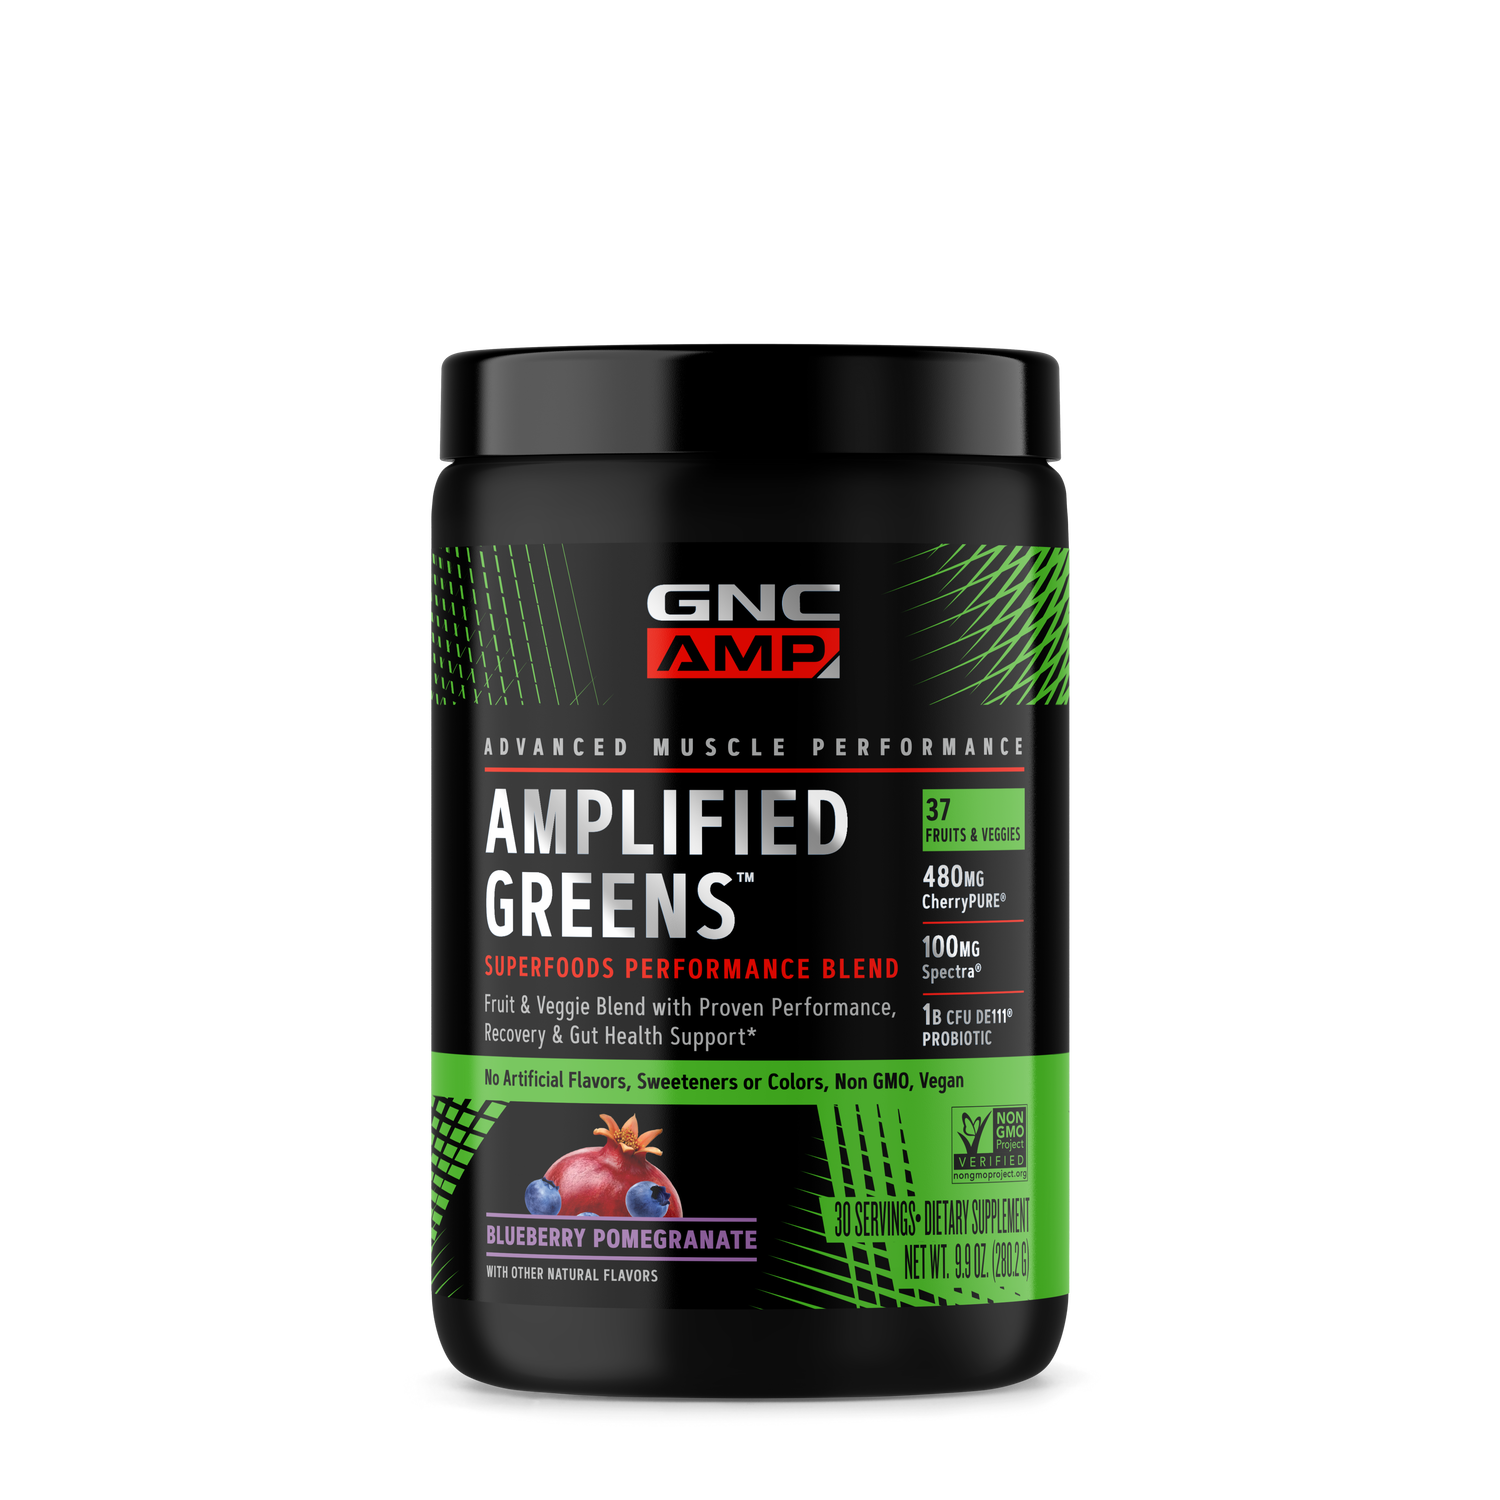 GNC AMP Amplified Greens Superfood Blend Healthy - Blueberry Pomegranate Healthy - 9.9 Oz. (30 Servings)